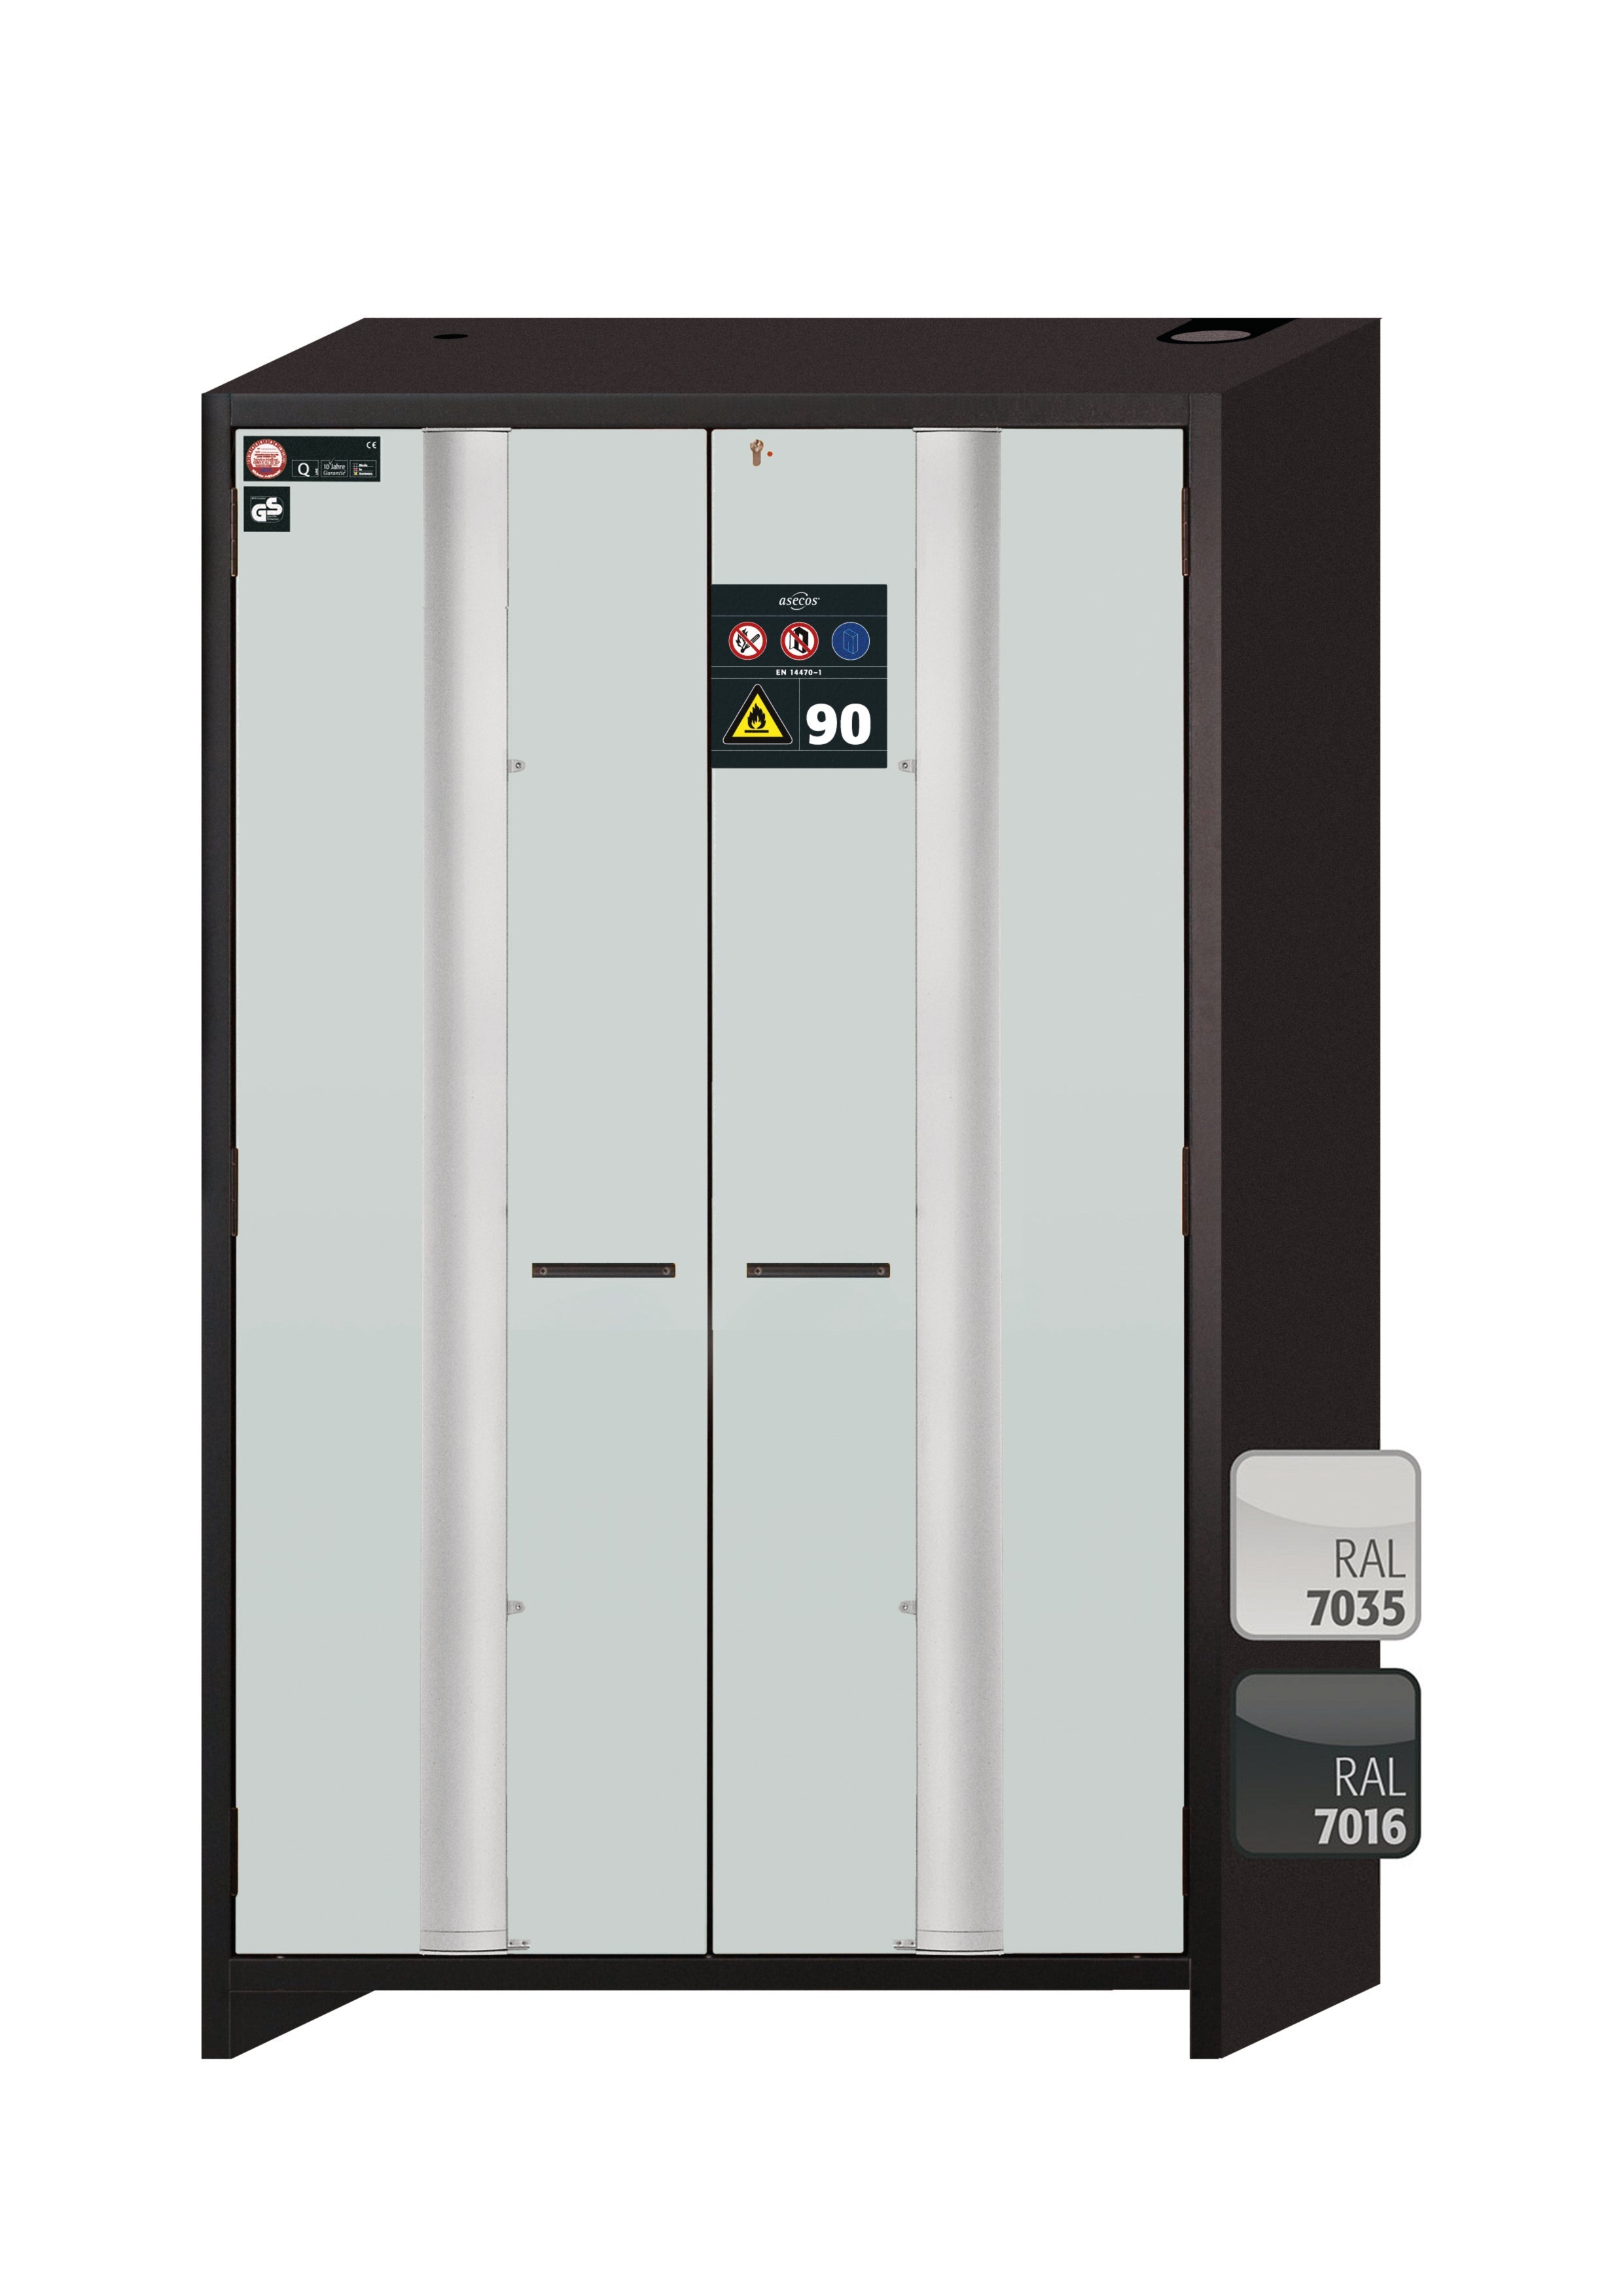 Type 90 safety cabinet Q-PHOENIX-90 model Q90.195.120.FD in light gray RAL 7035 with 2x standard pull-out tray (sheet steel)